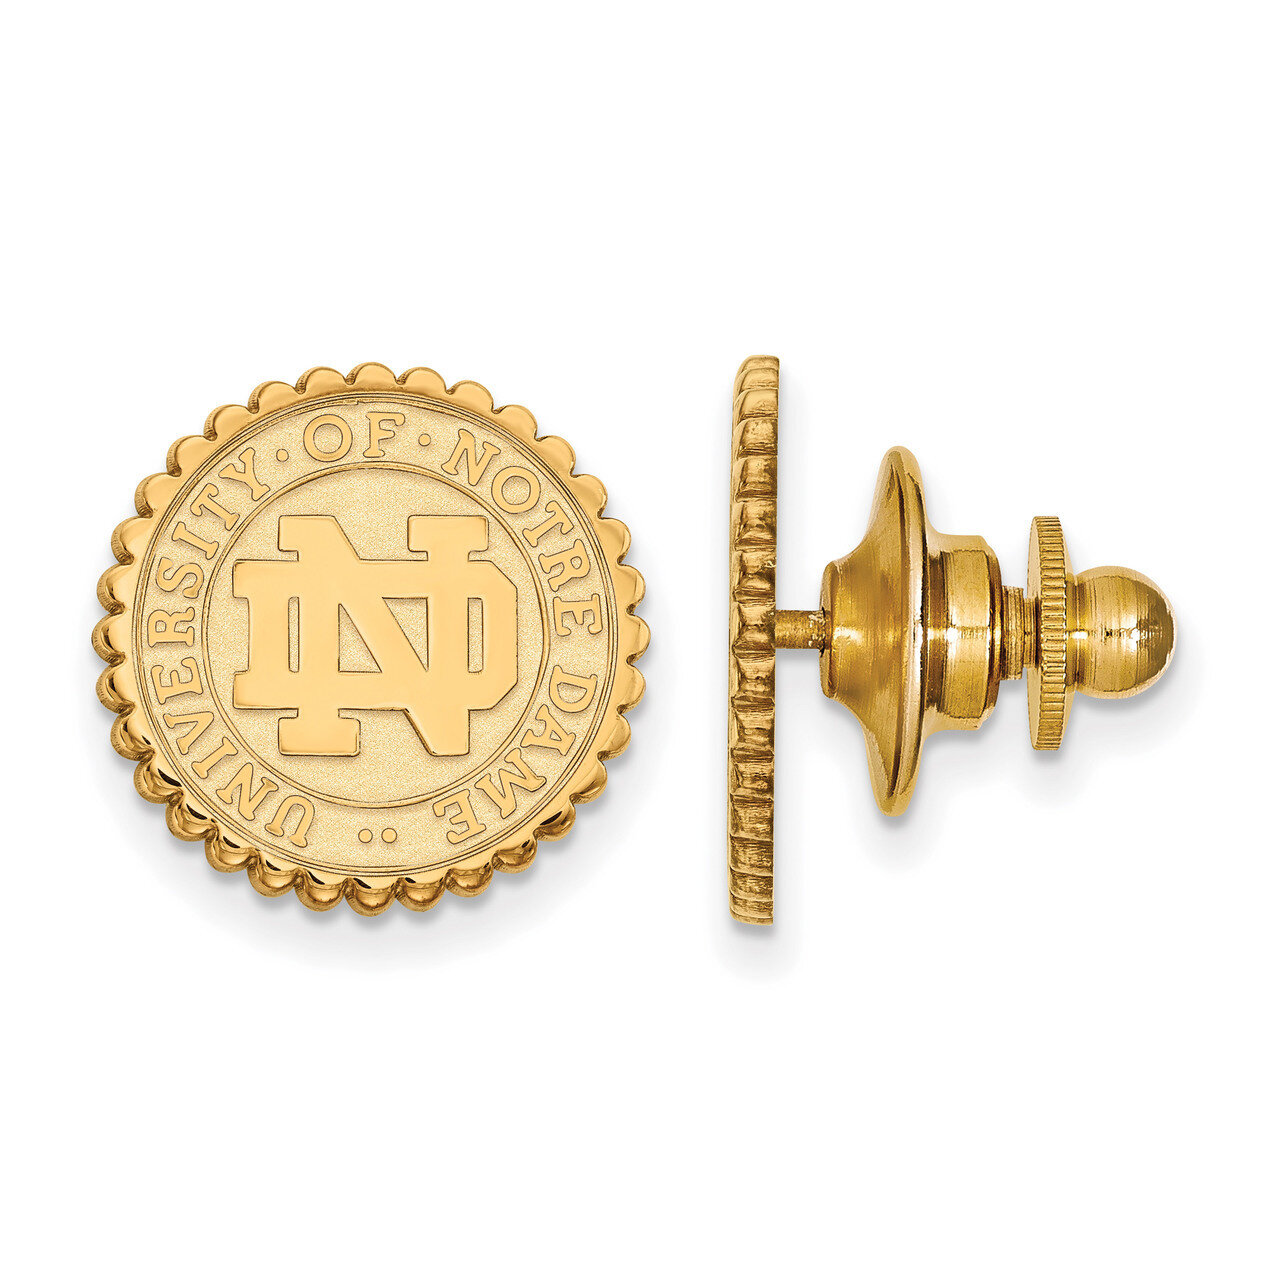 University of Notre Dame Crest Tie Tac Gold-plated Sterling Silver GP068UND